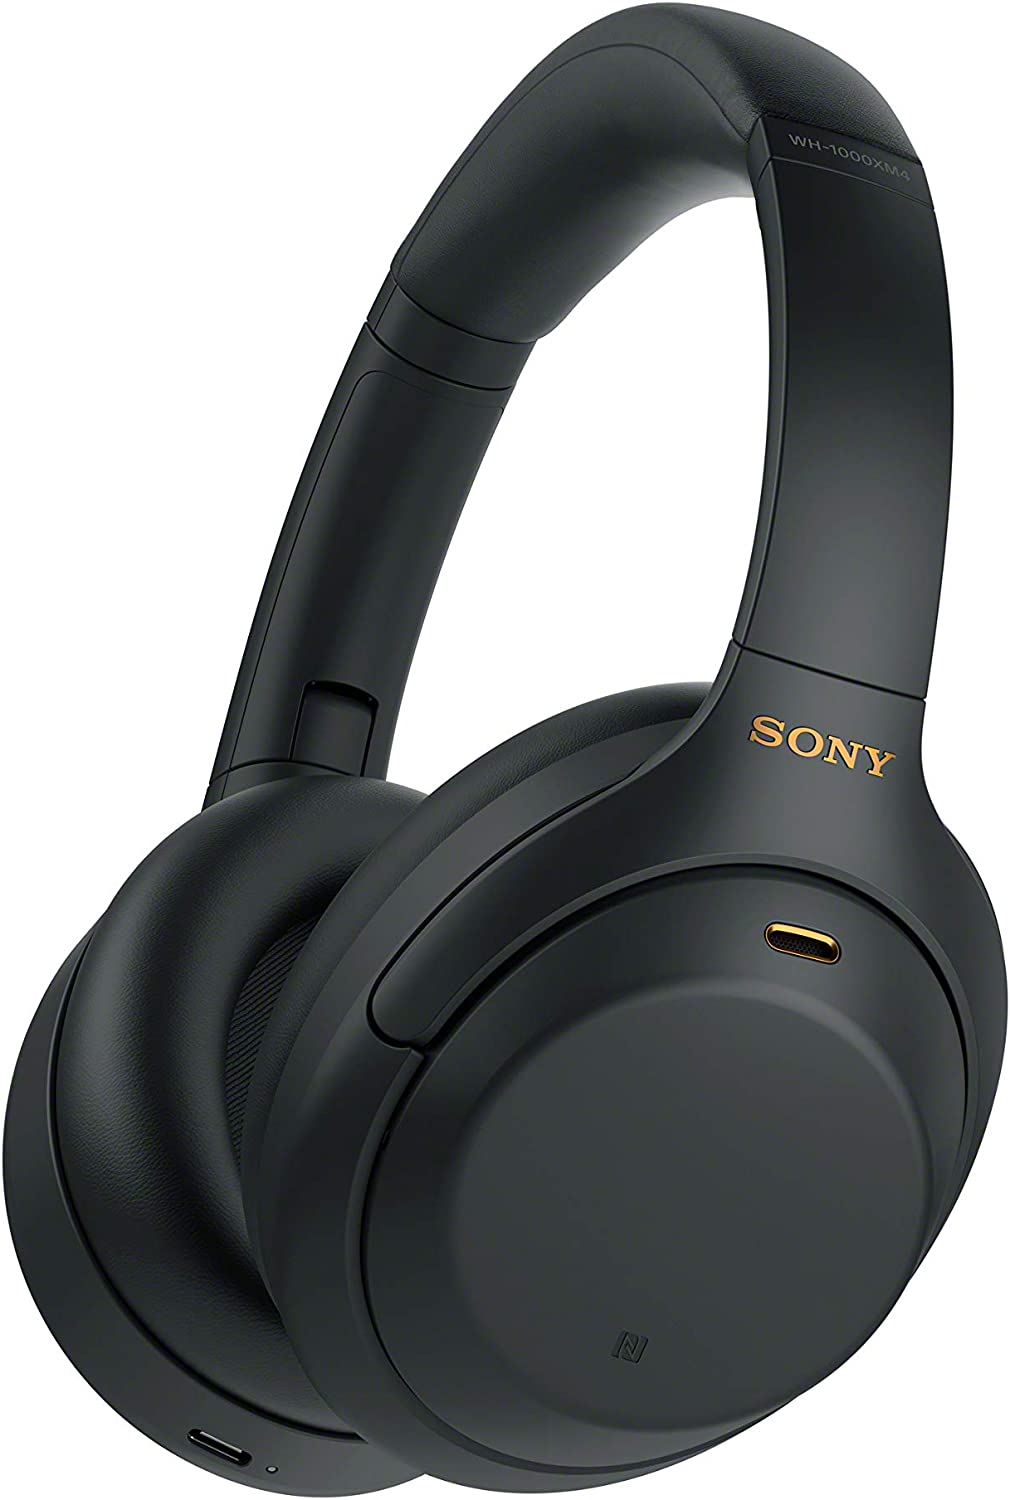 Headphones and TVs from Sony are on sale at Amazon for all-time low rates